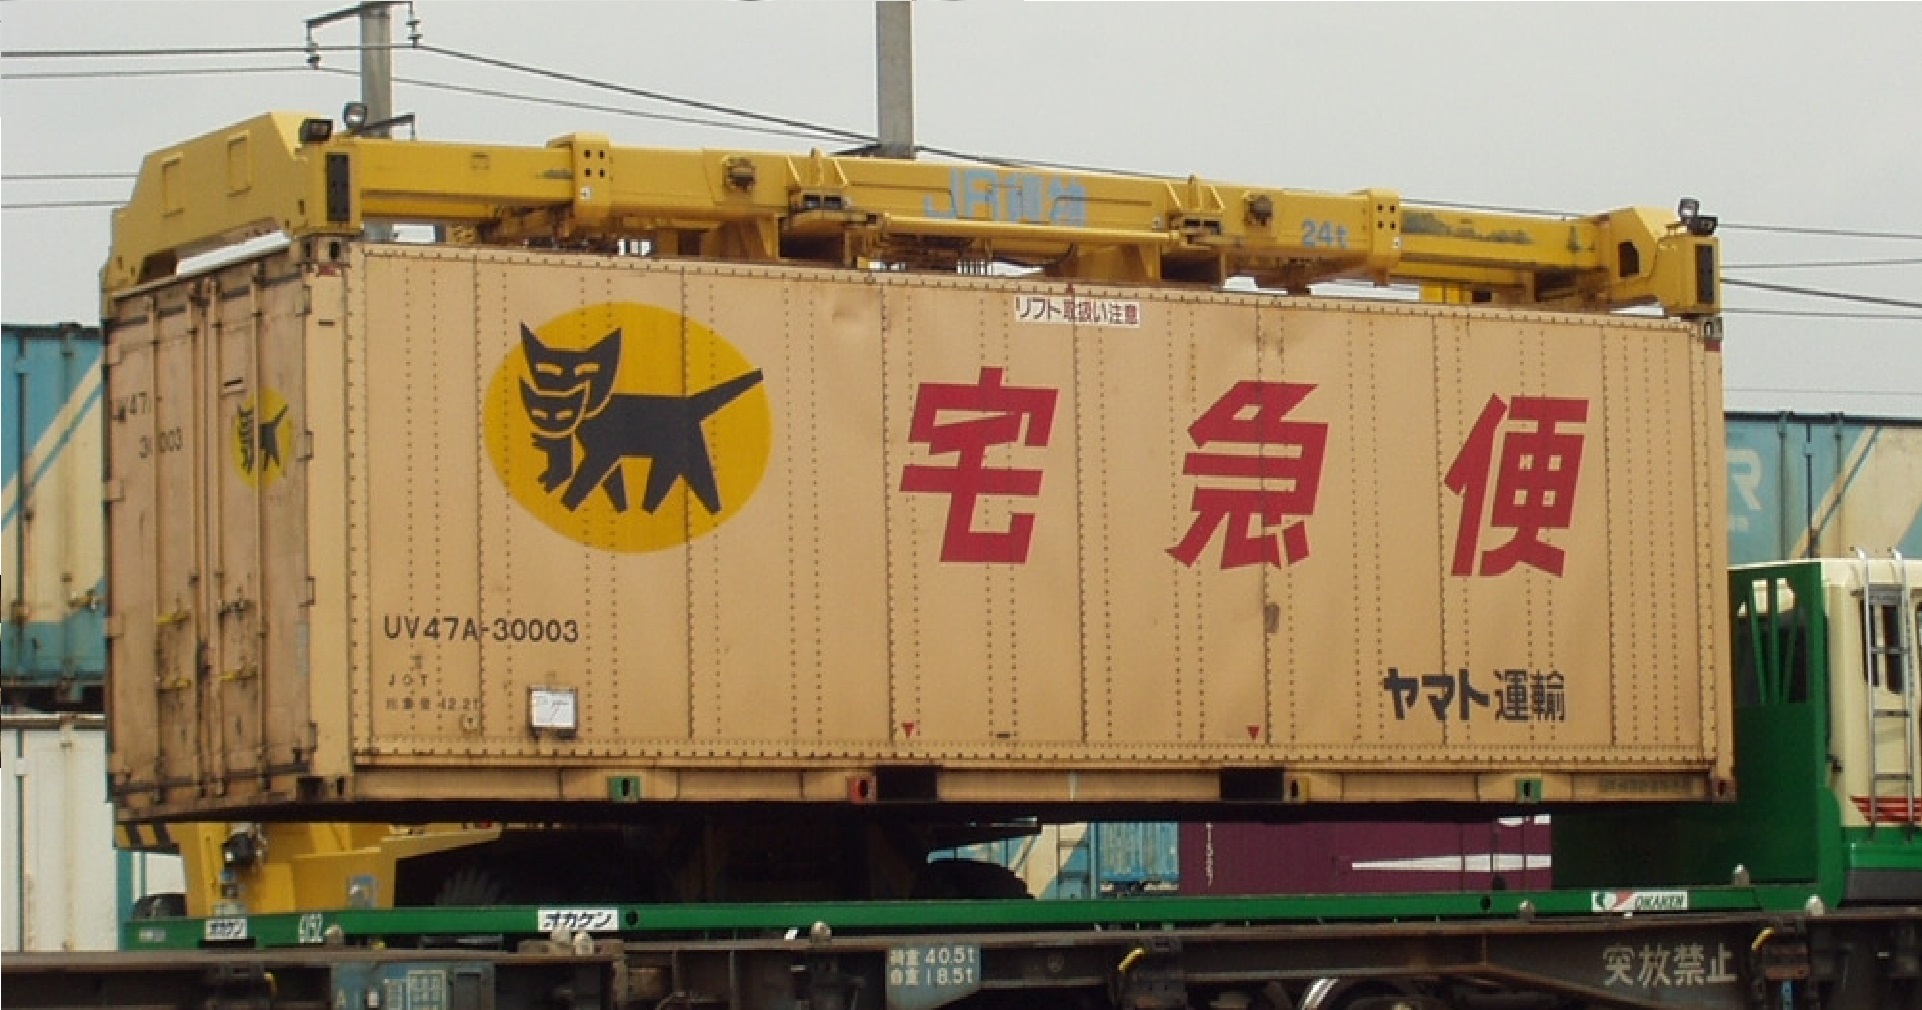 File:UV47A-30003 【ＪＯＴ日本石油輸送／ヤマト運輸】Containers of 